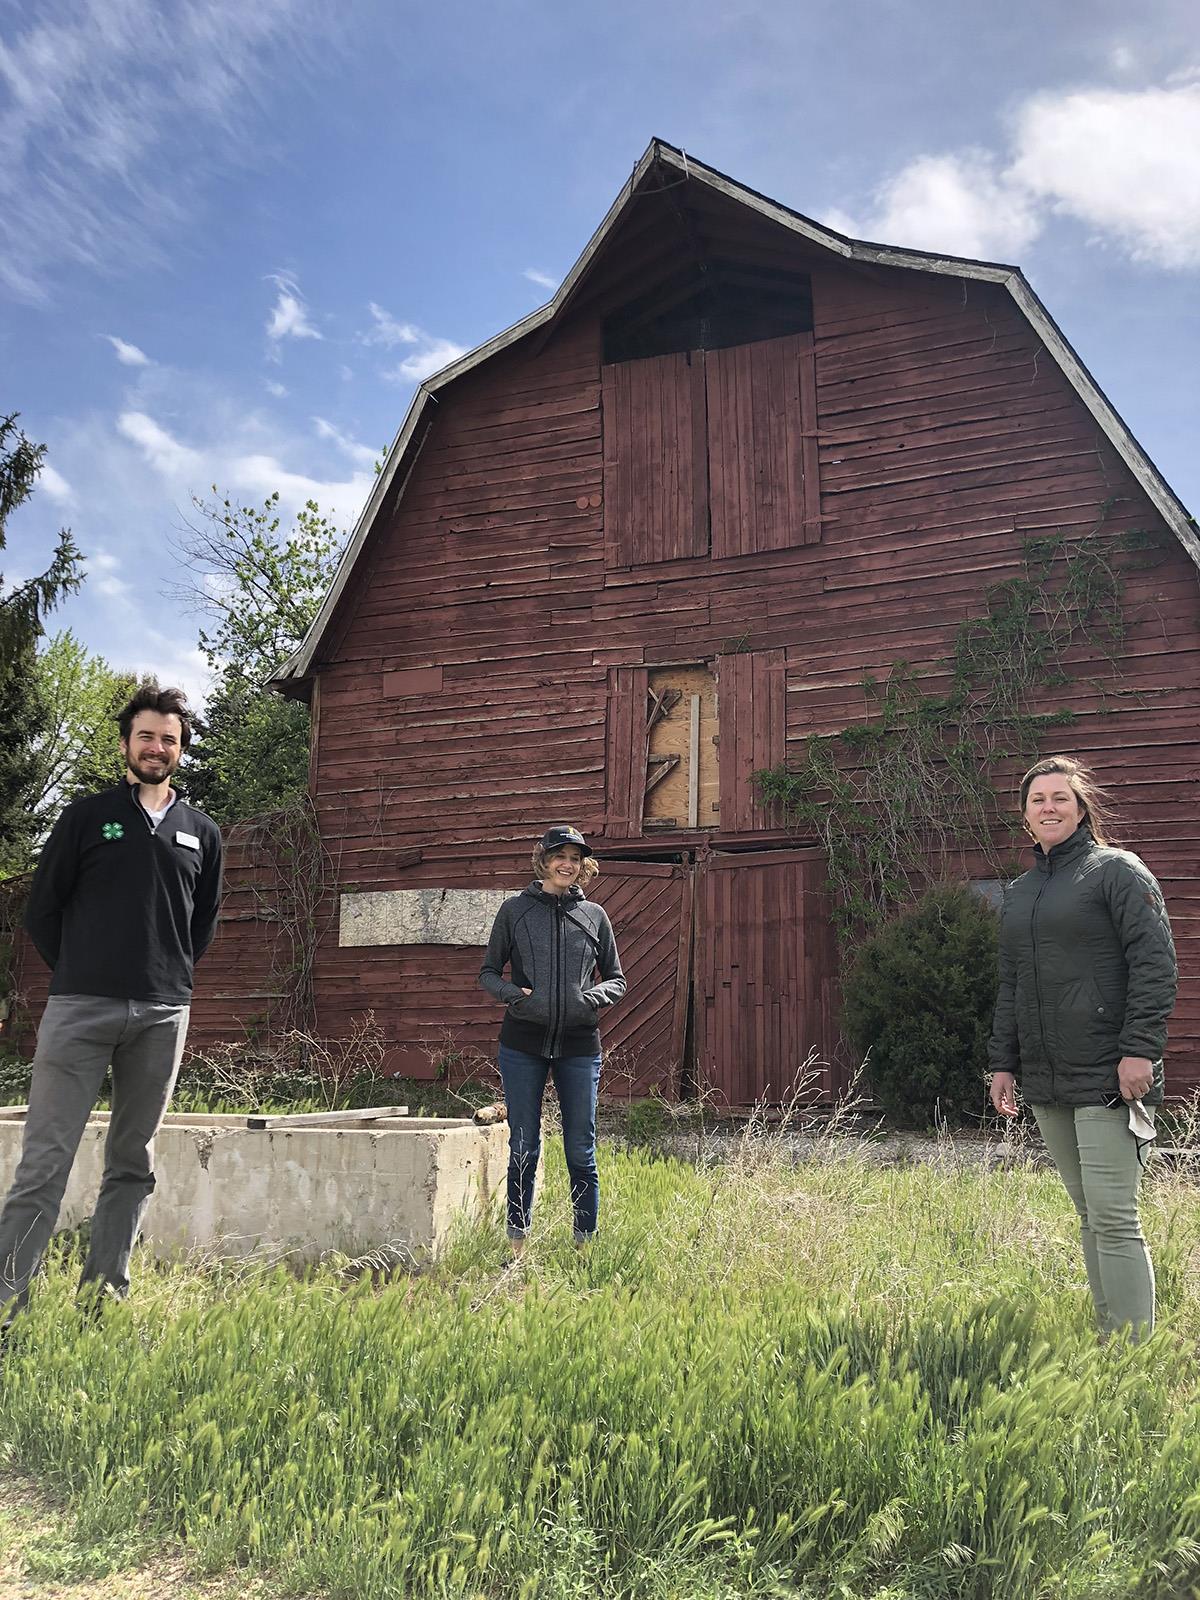 People involved in Boise’s Spaulding Ranch farm project stand in front of an old barn at the site of a historical but inactive farmstead. The city of Boise plans to revive Spaulding Ranch as a city park that is also a farm. From left to right: Allen Taggert (Ada County 4-H), Ariel Agenbroad (University of Idaho Extension) and Sara Arkle (city of Boise). 